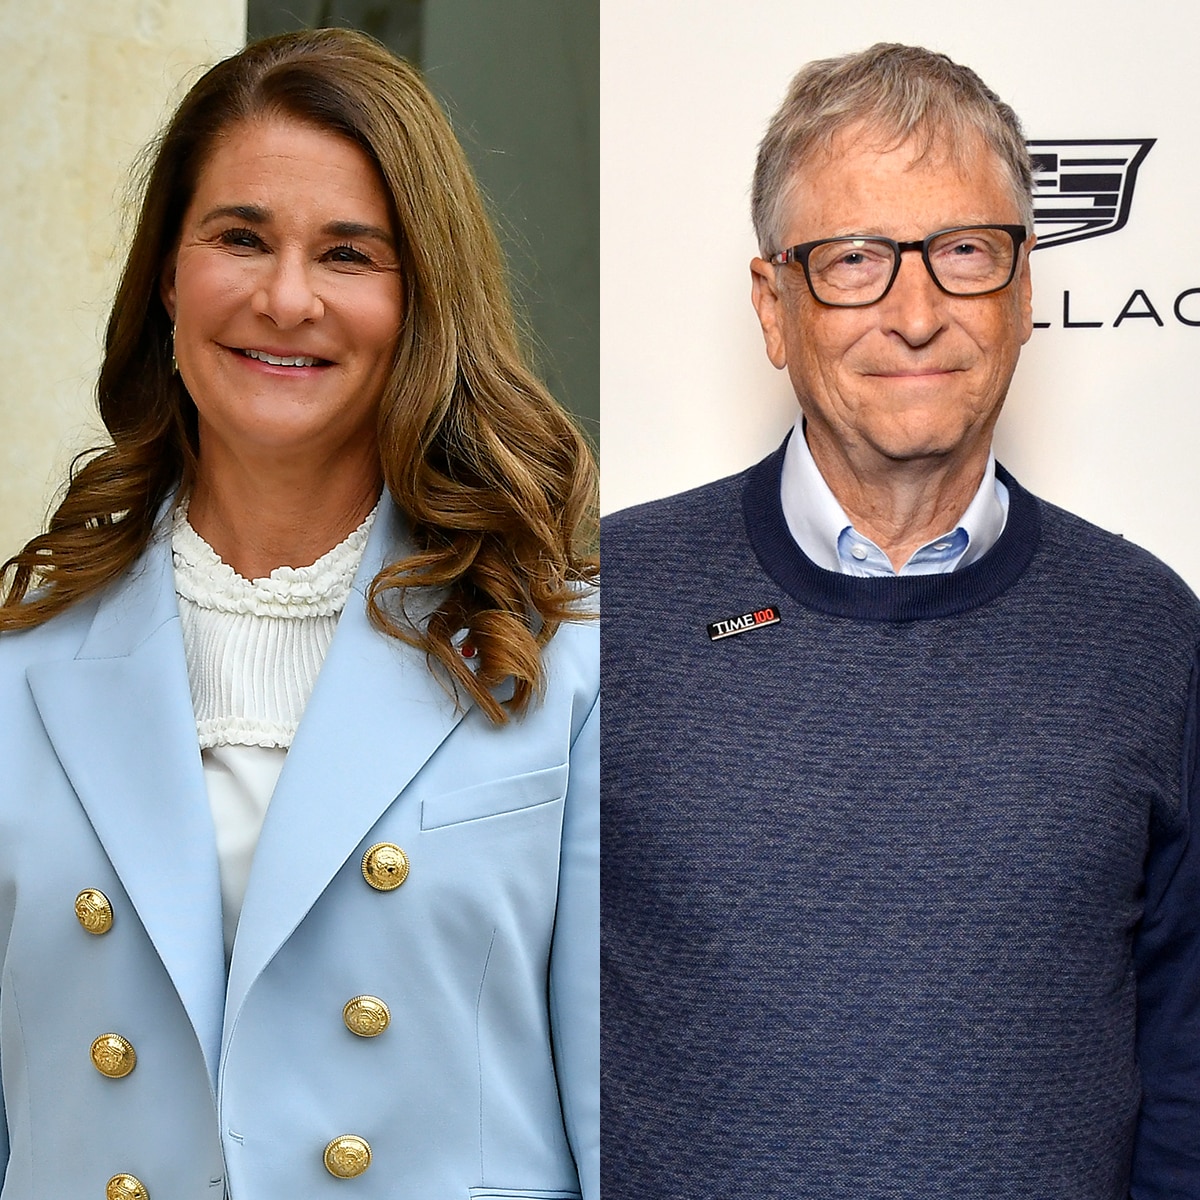 Melinda Gates Resigns From Foundation Shared With Ex Bill Gates [Video]